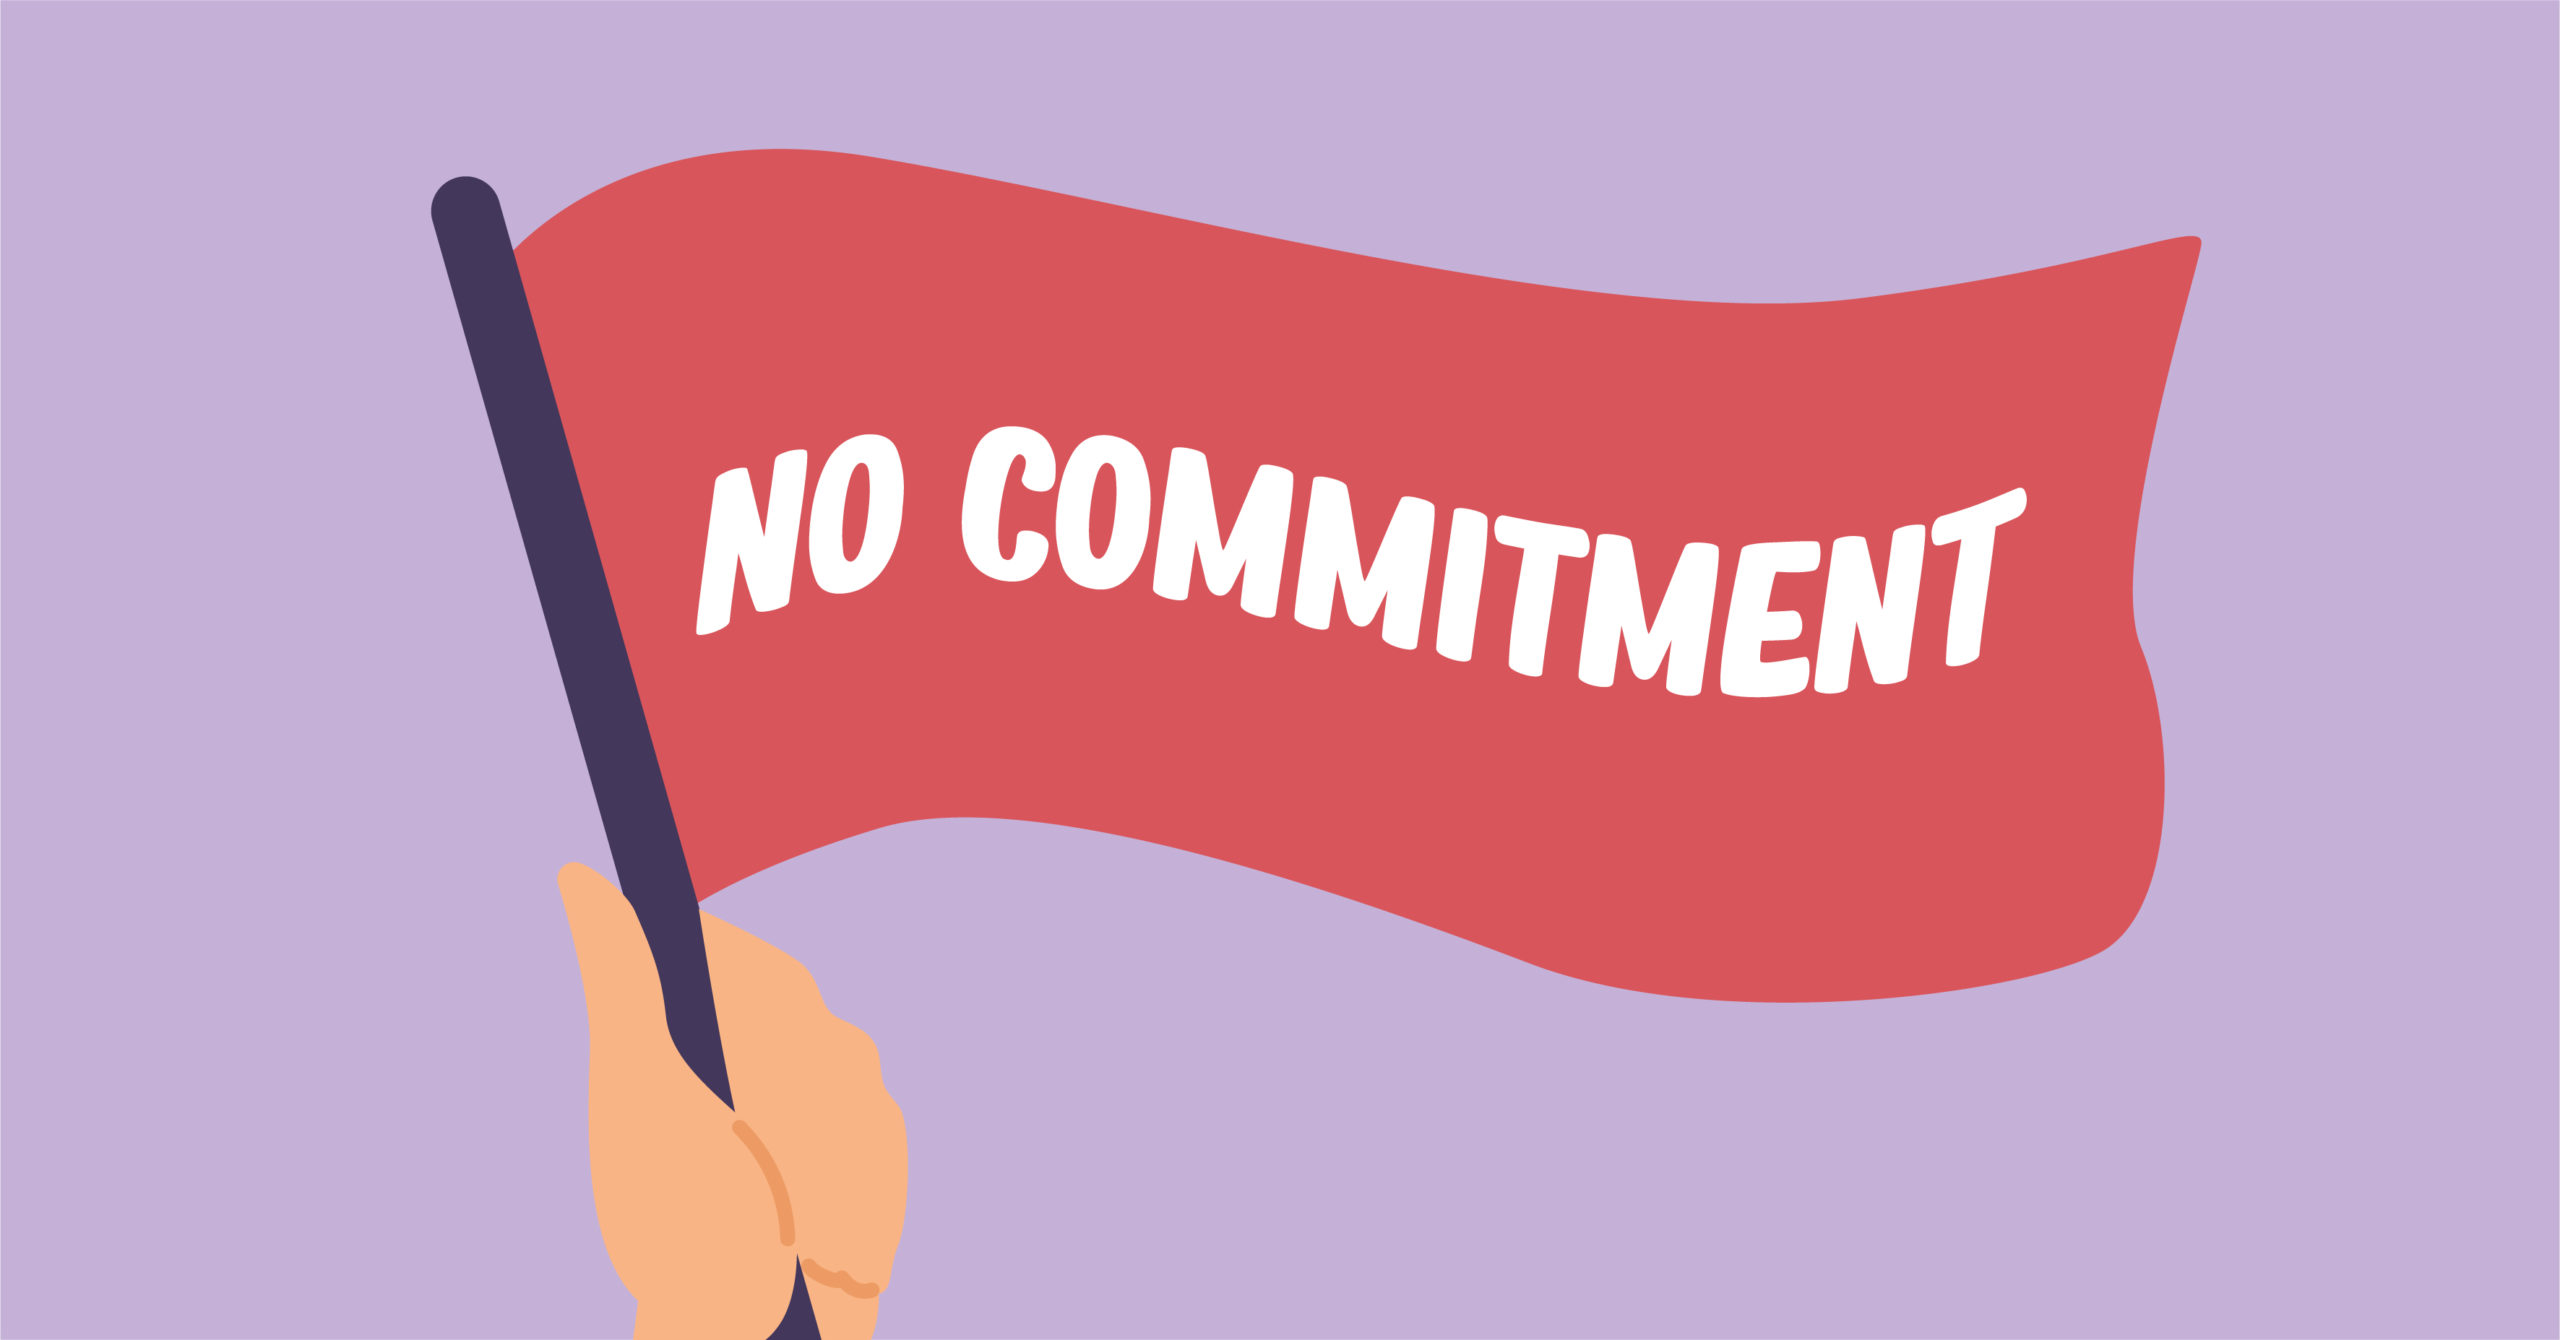 He’s clear on not wanting commitment